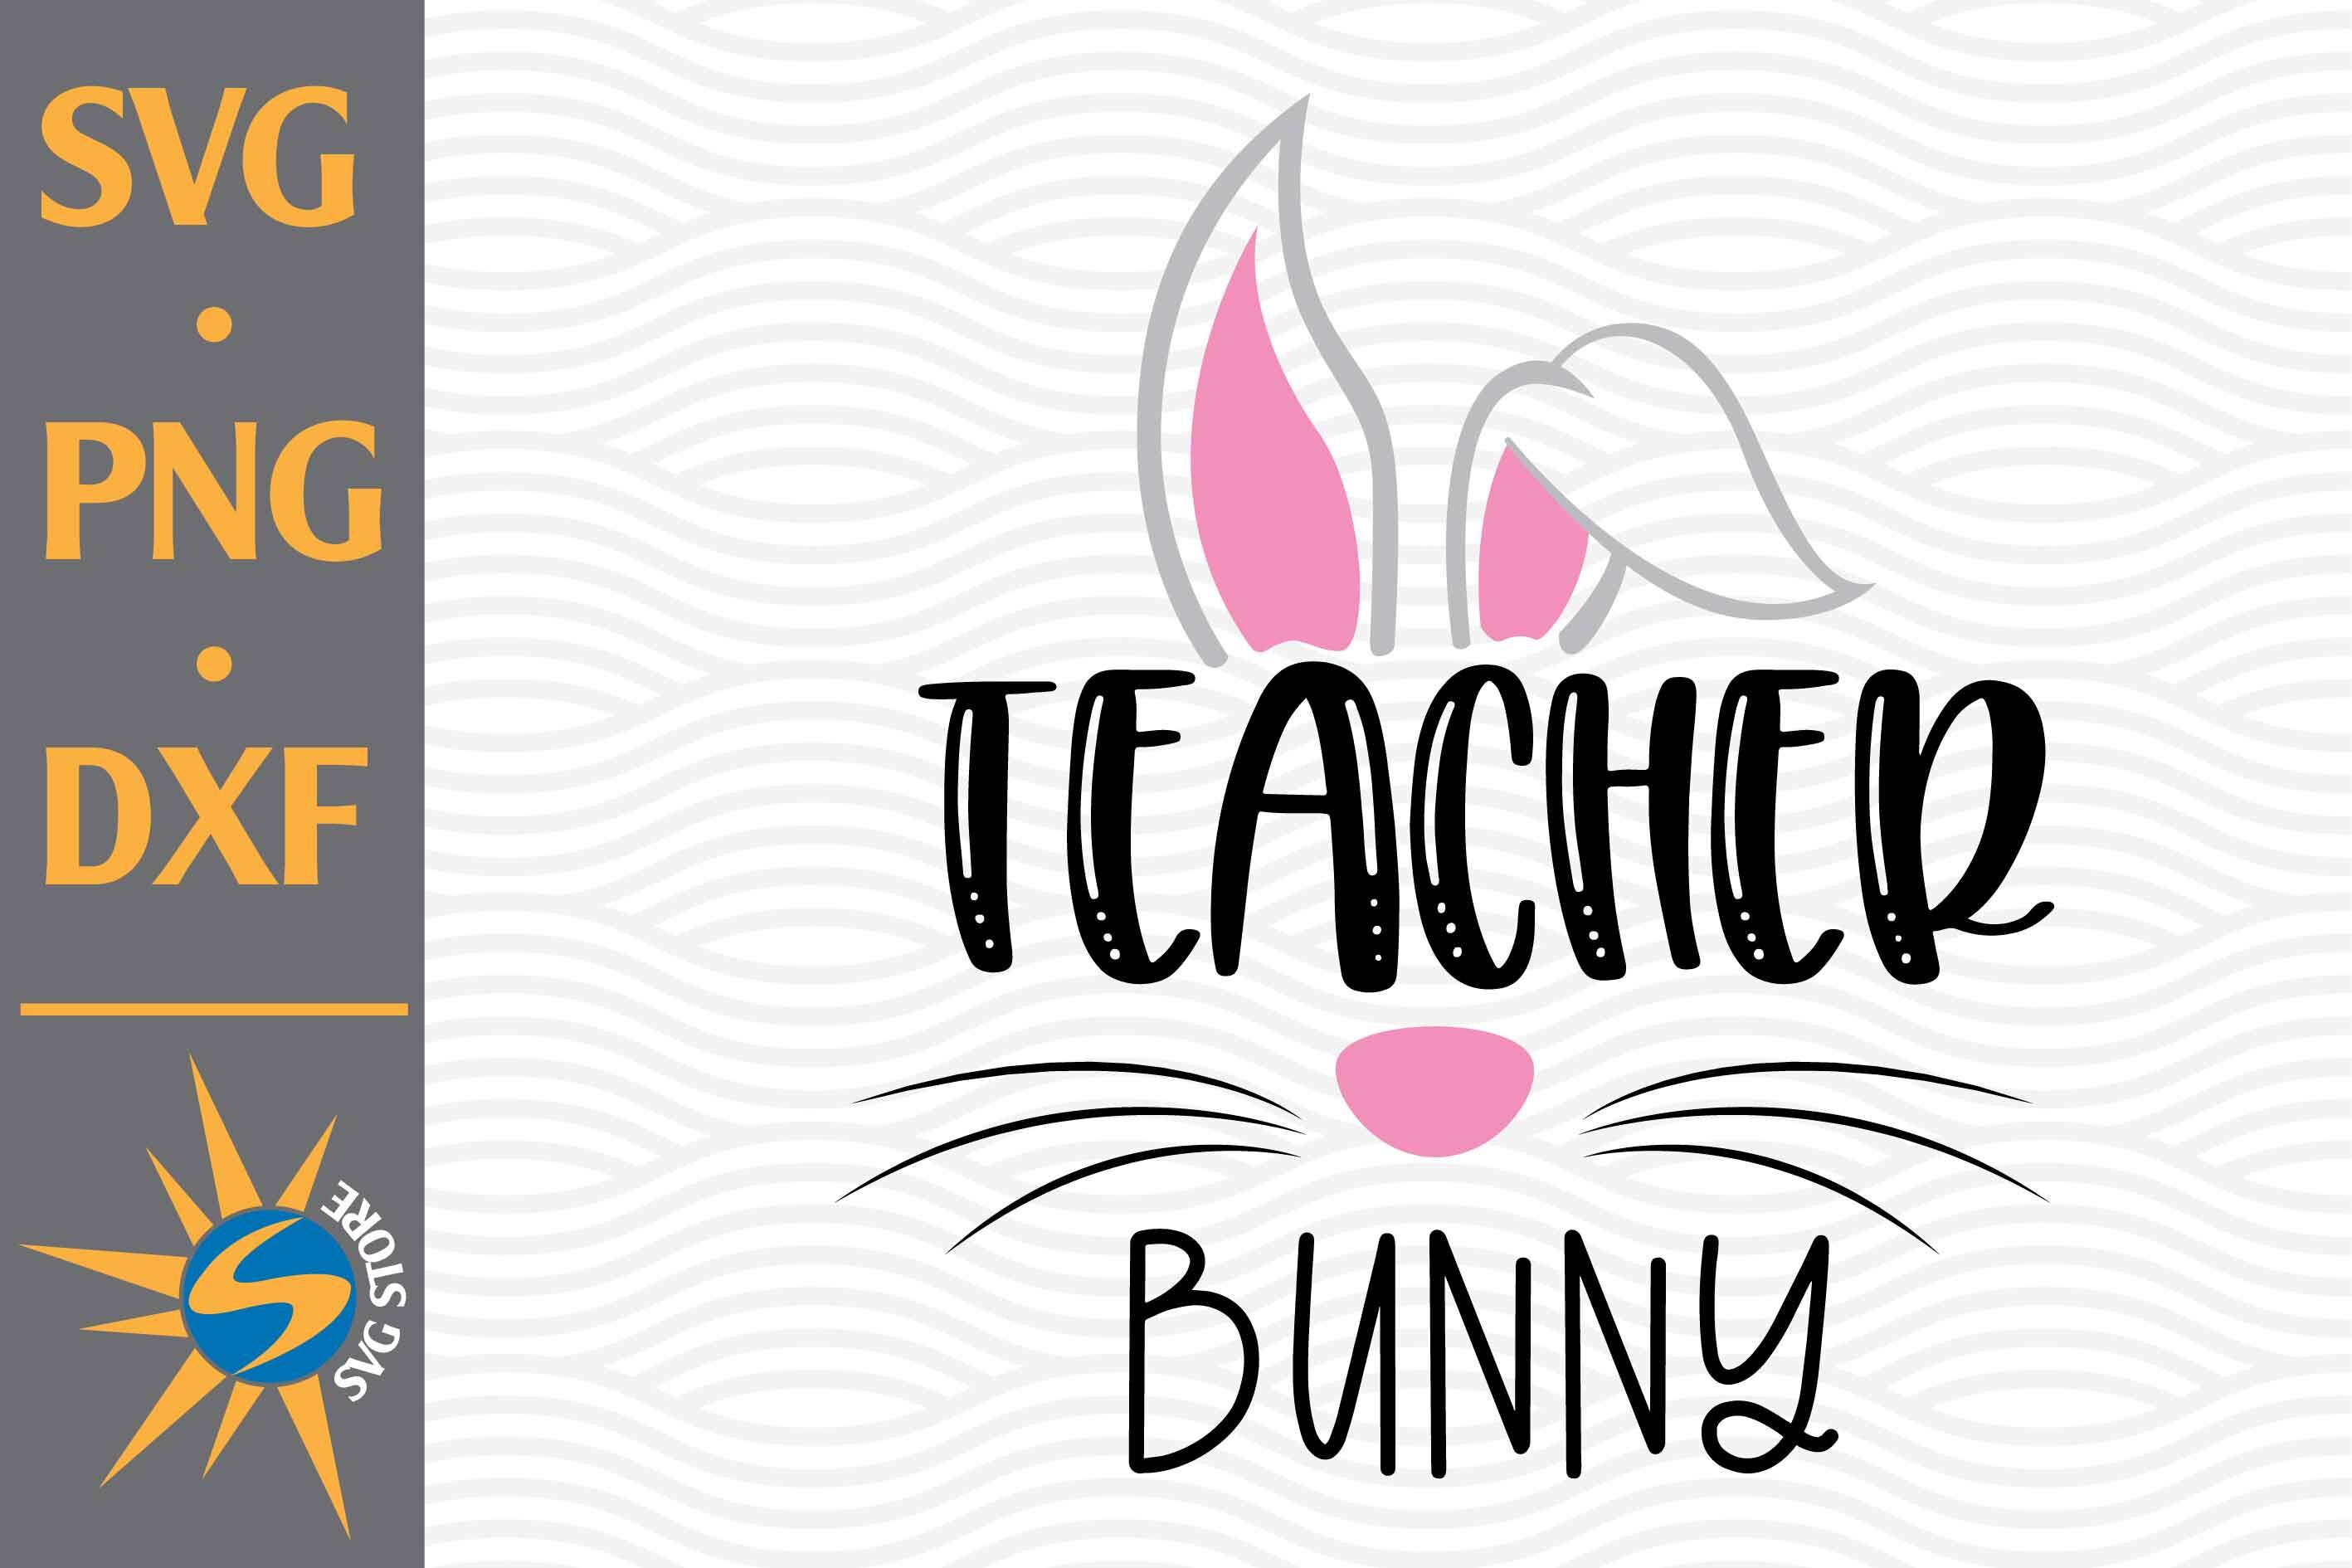 Teacher Bunny SVG, PNG, DXF Digital Files Include By SVGStoreShop